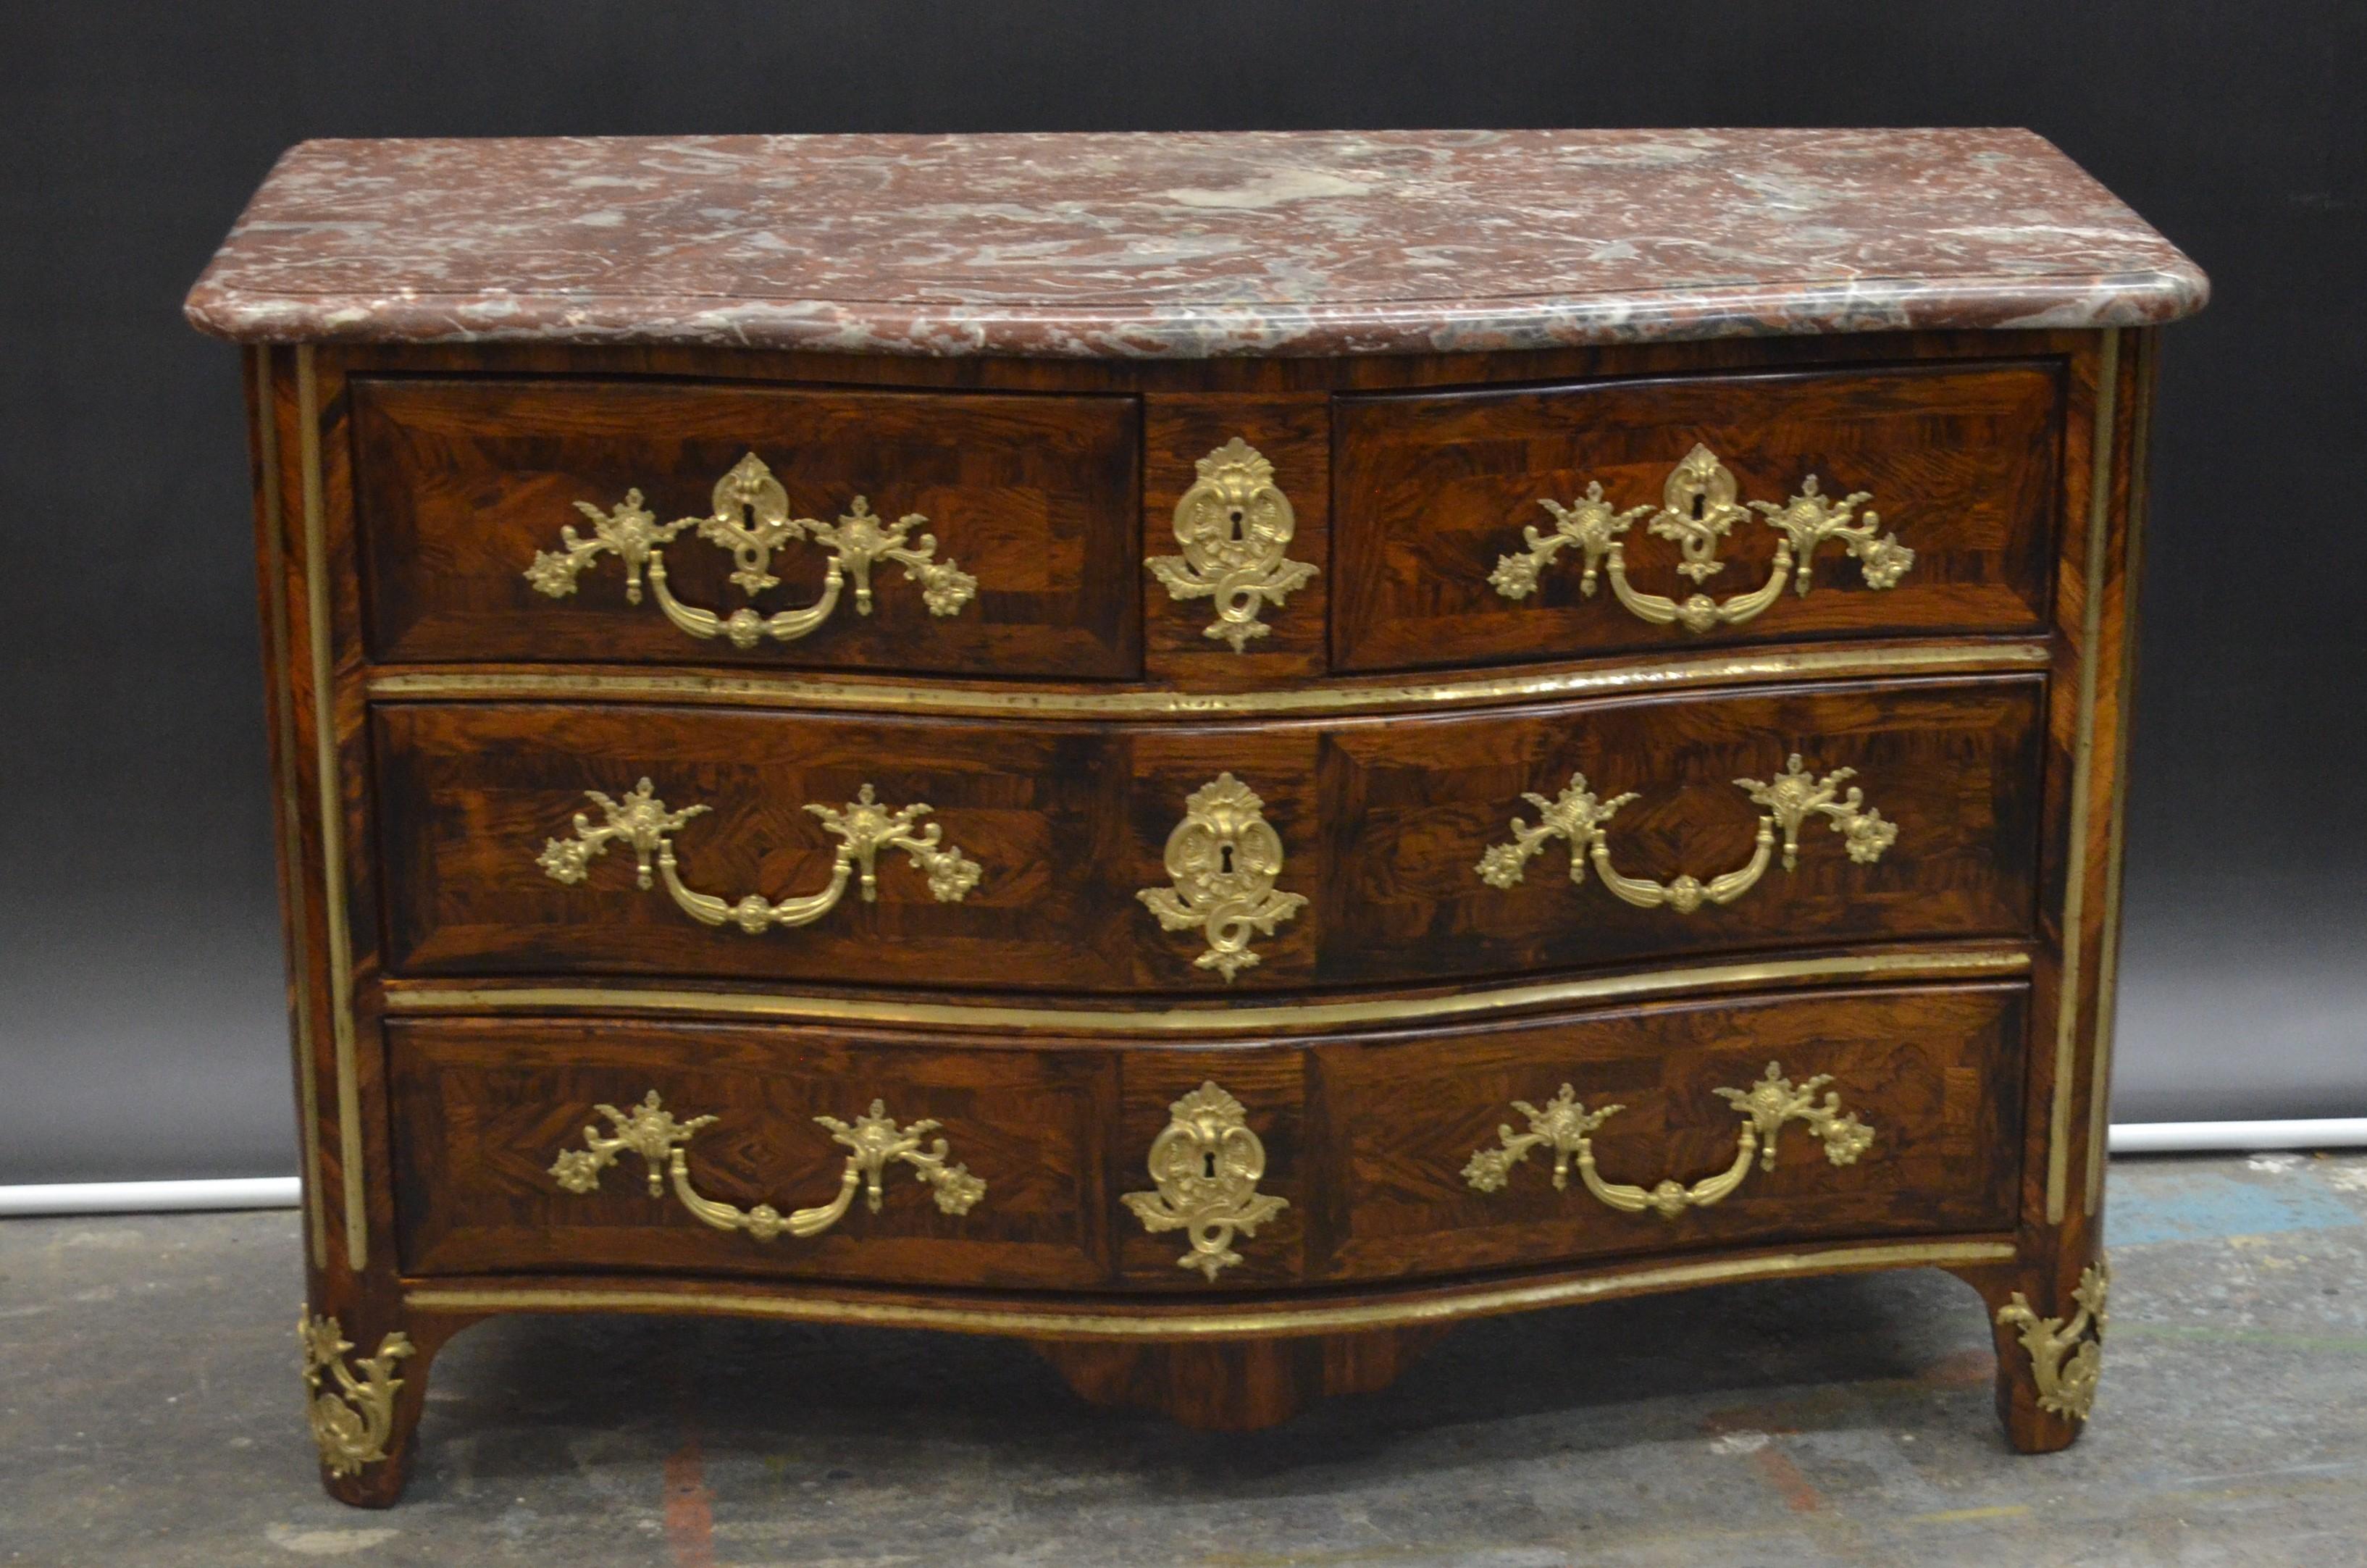 French Régence Ormolu-Mounted Rosewood & Kingwood Inlay Rouge Marble Top Commode For Sale 10